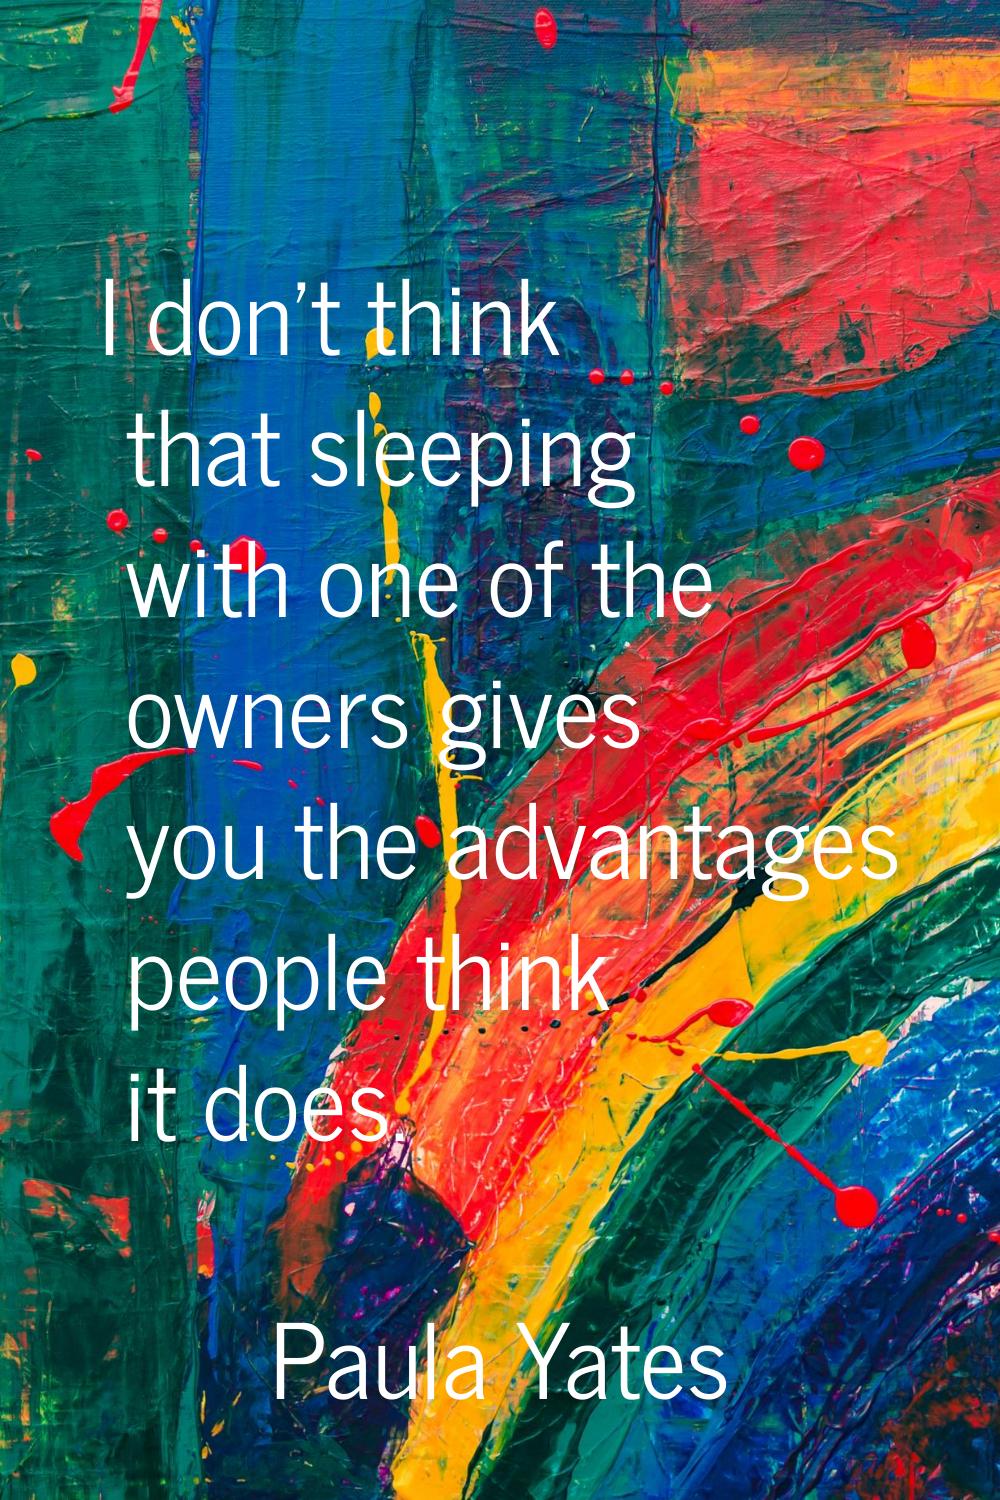 I don't think that sleeping with one of the owners gives you the advantages people think it does.